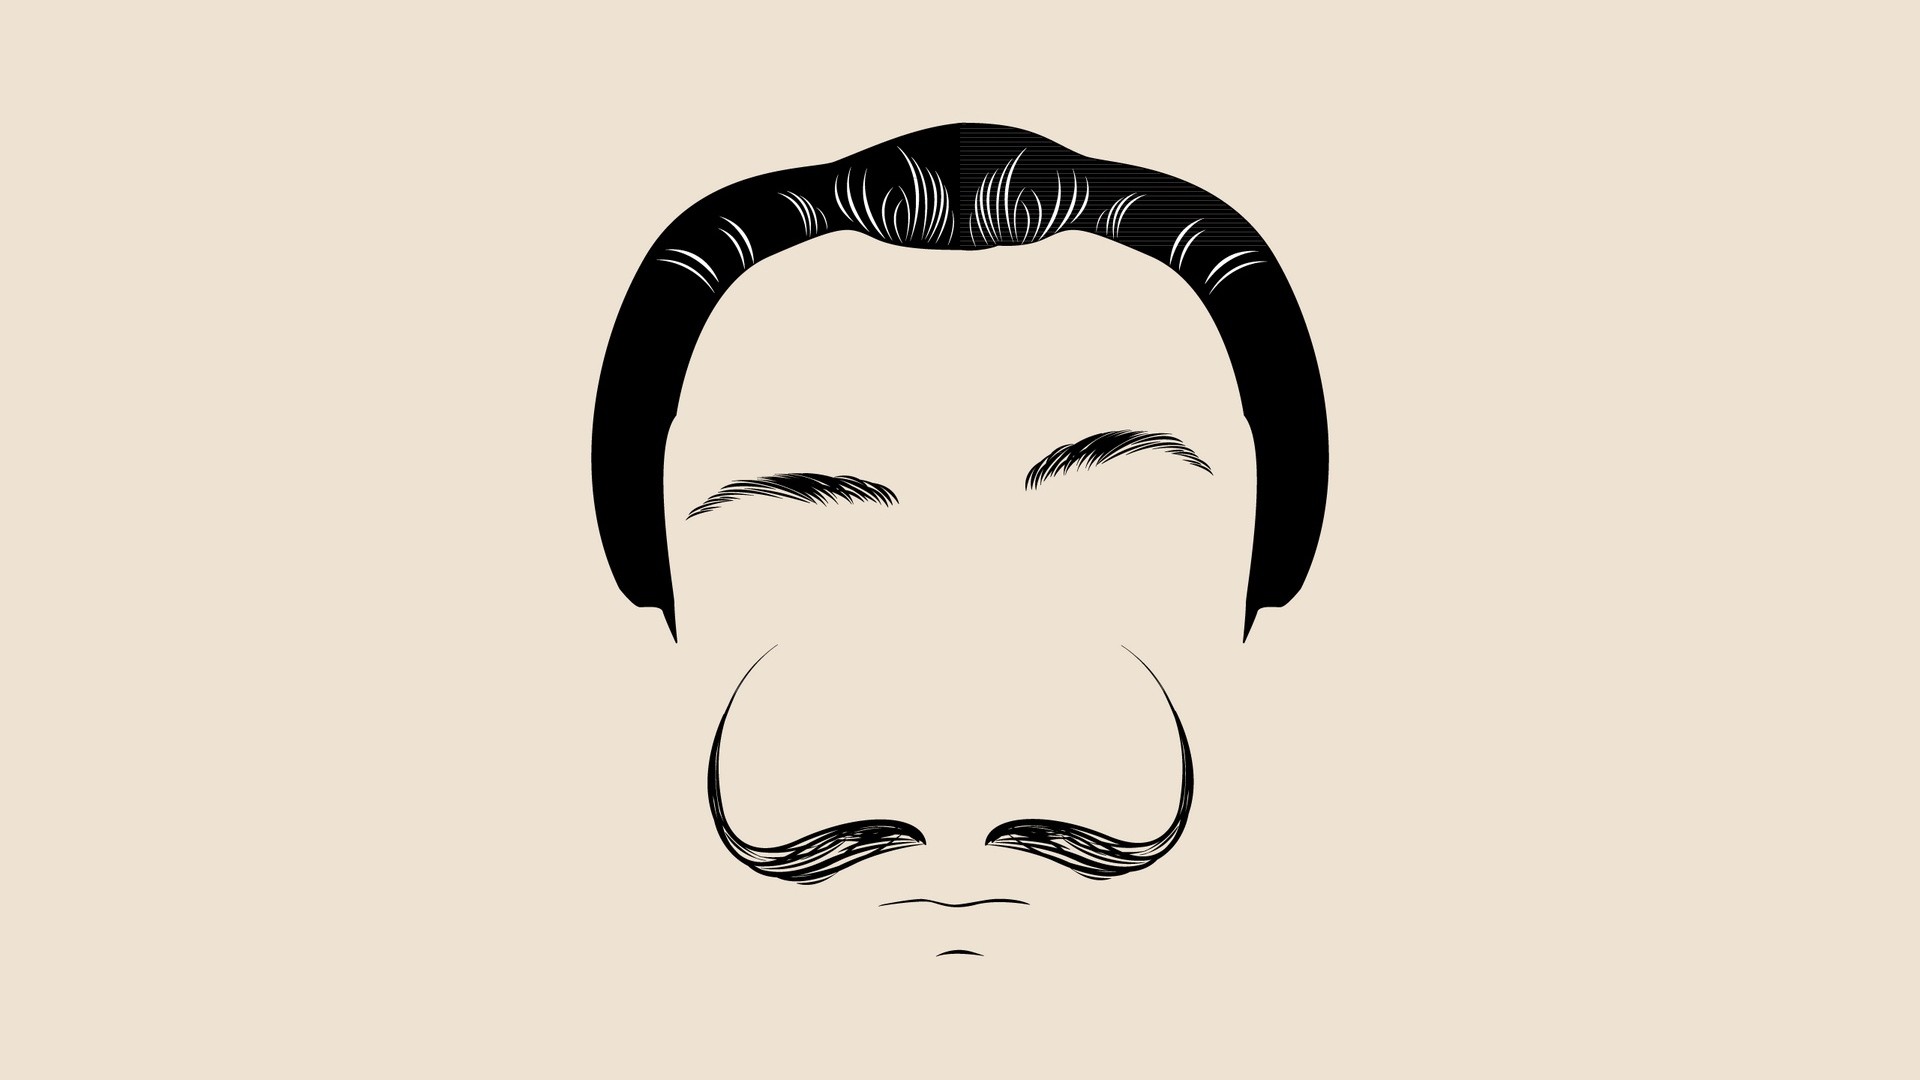 1920x1080 Mustache Wallpapers - Android Apps on Google Play